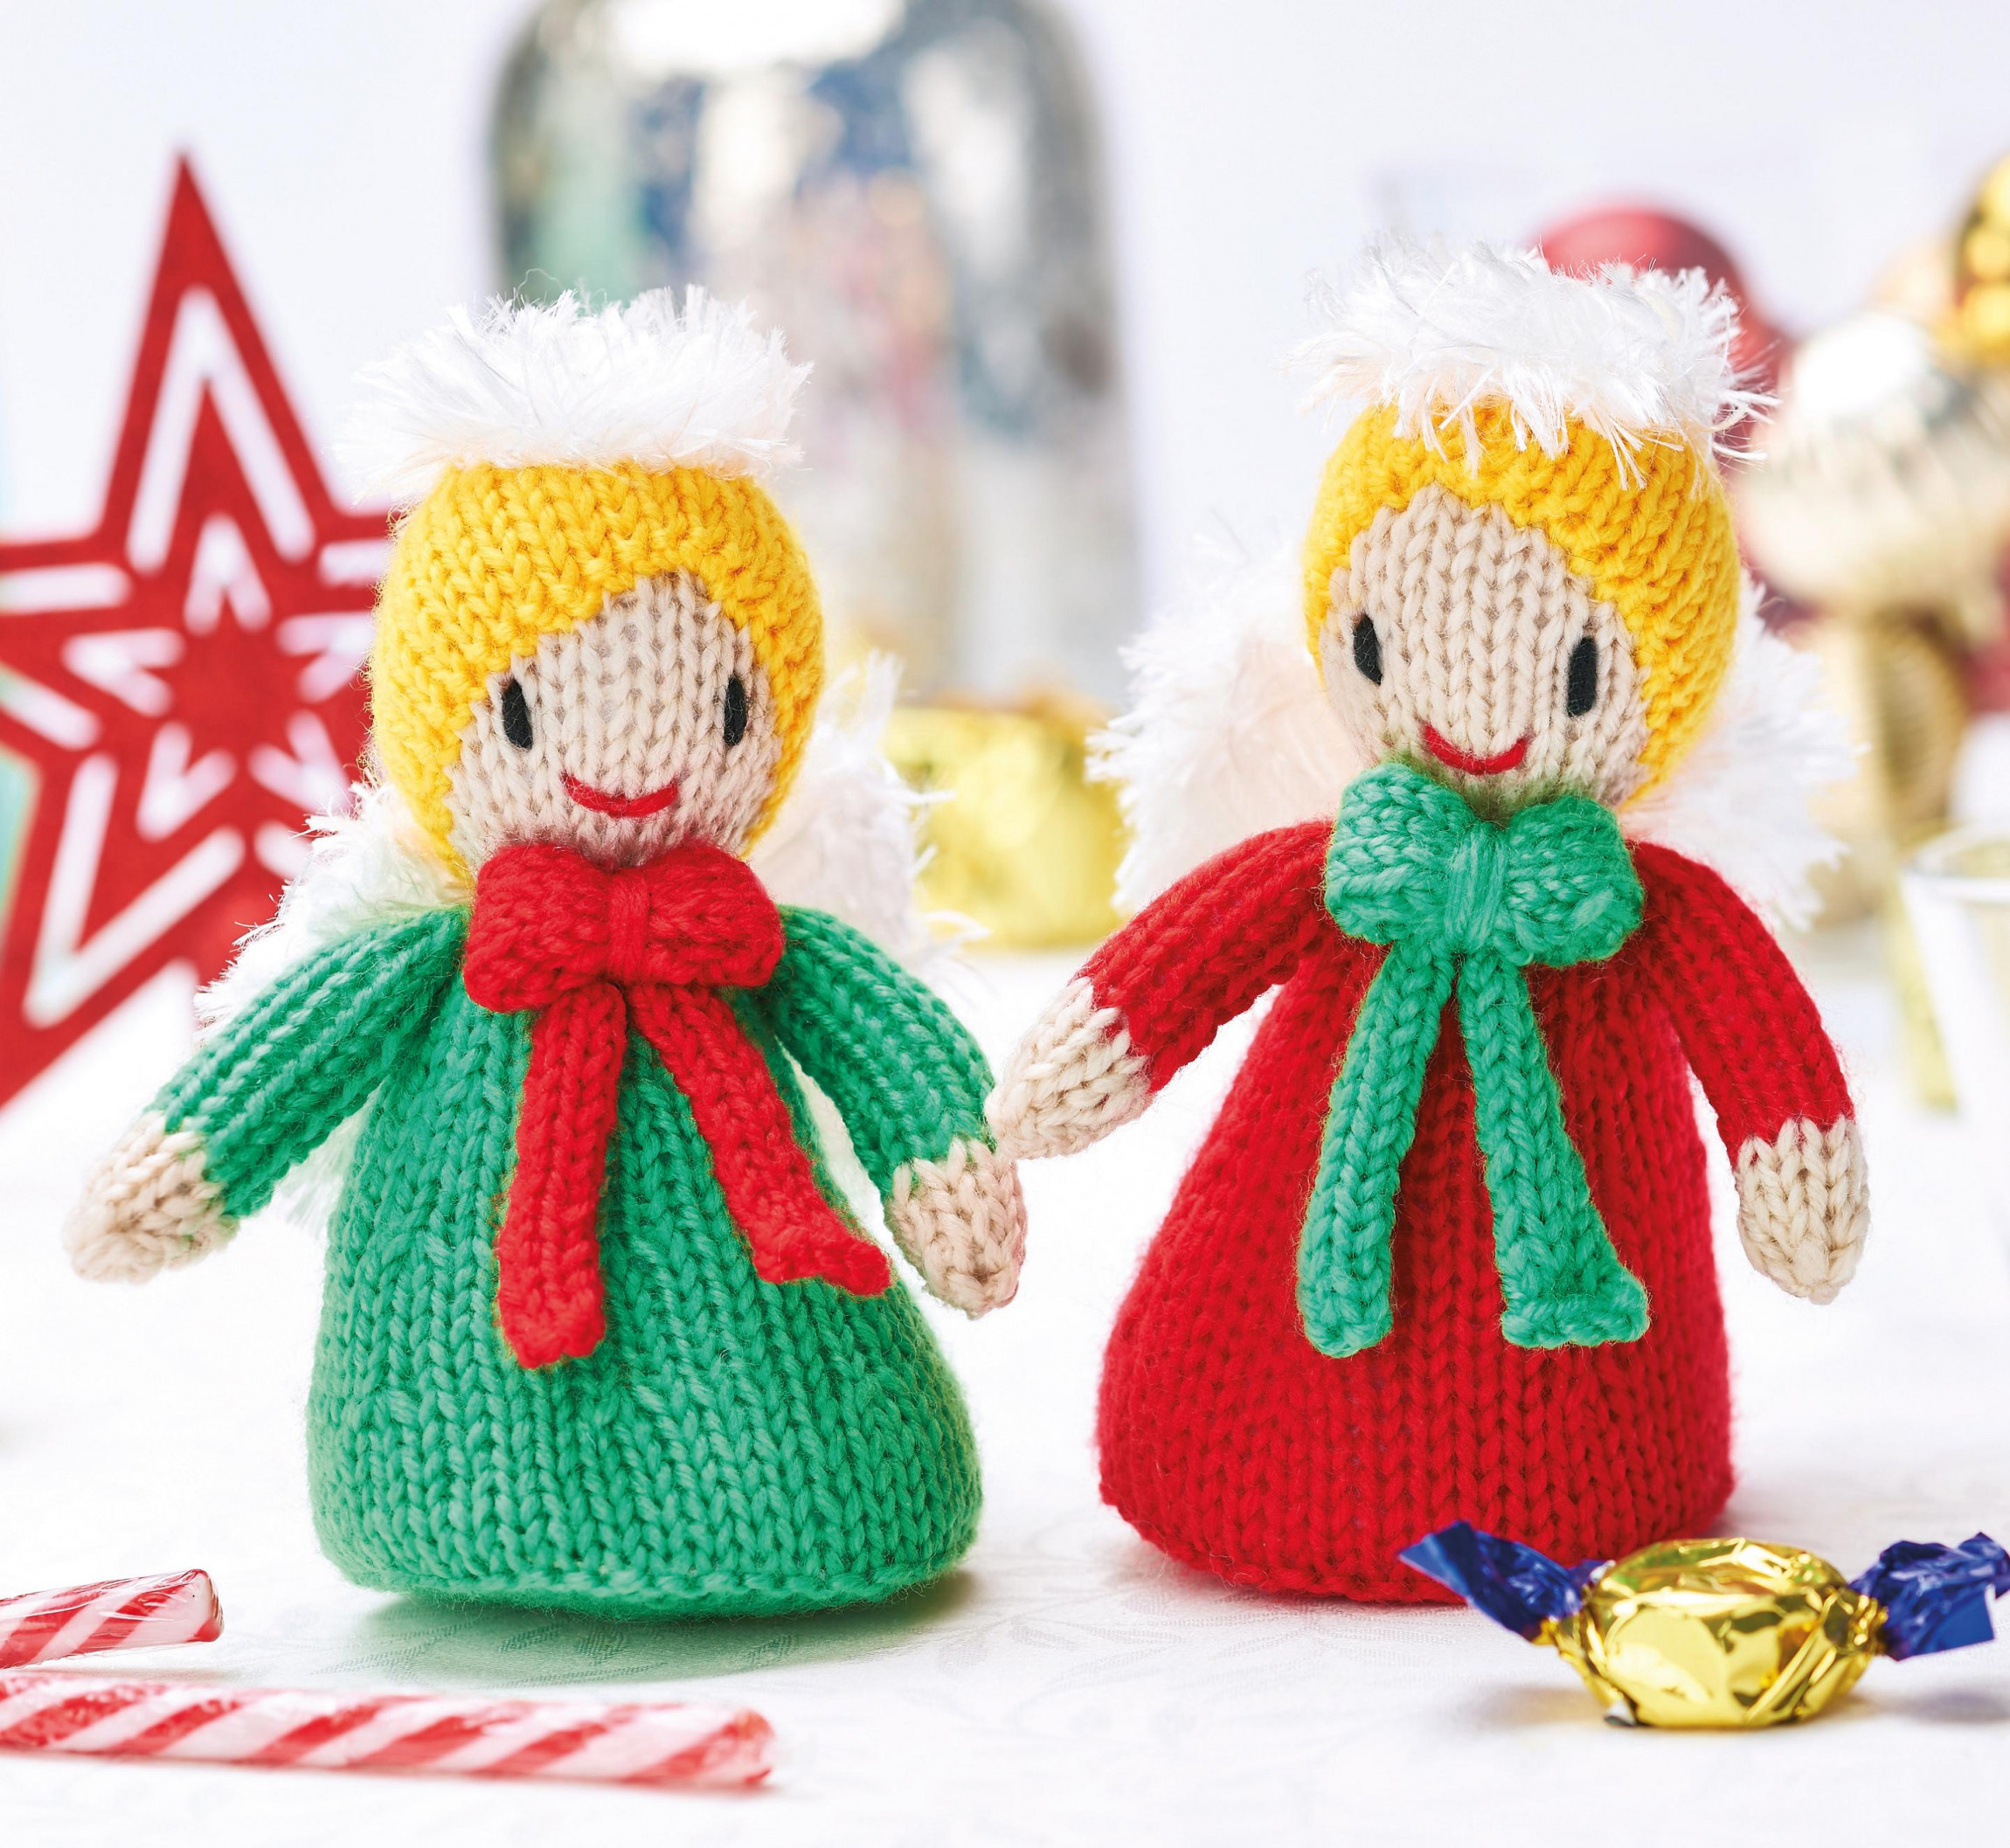 Christmas Angels Free Knitting Patterns Let's Knit Magazine